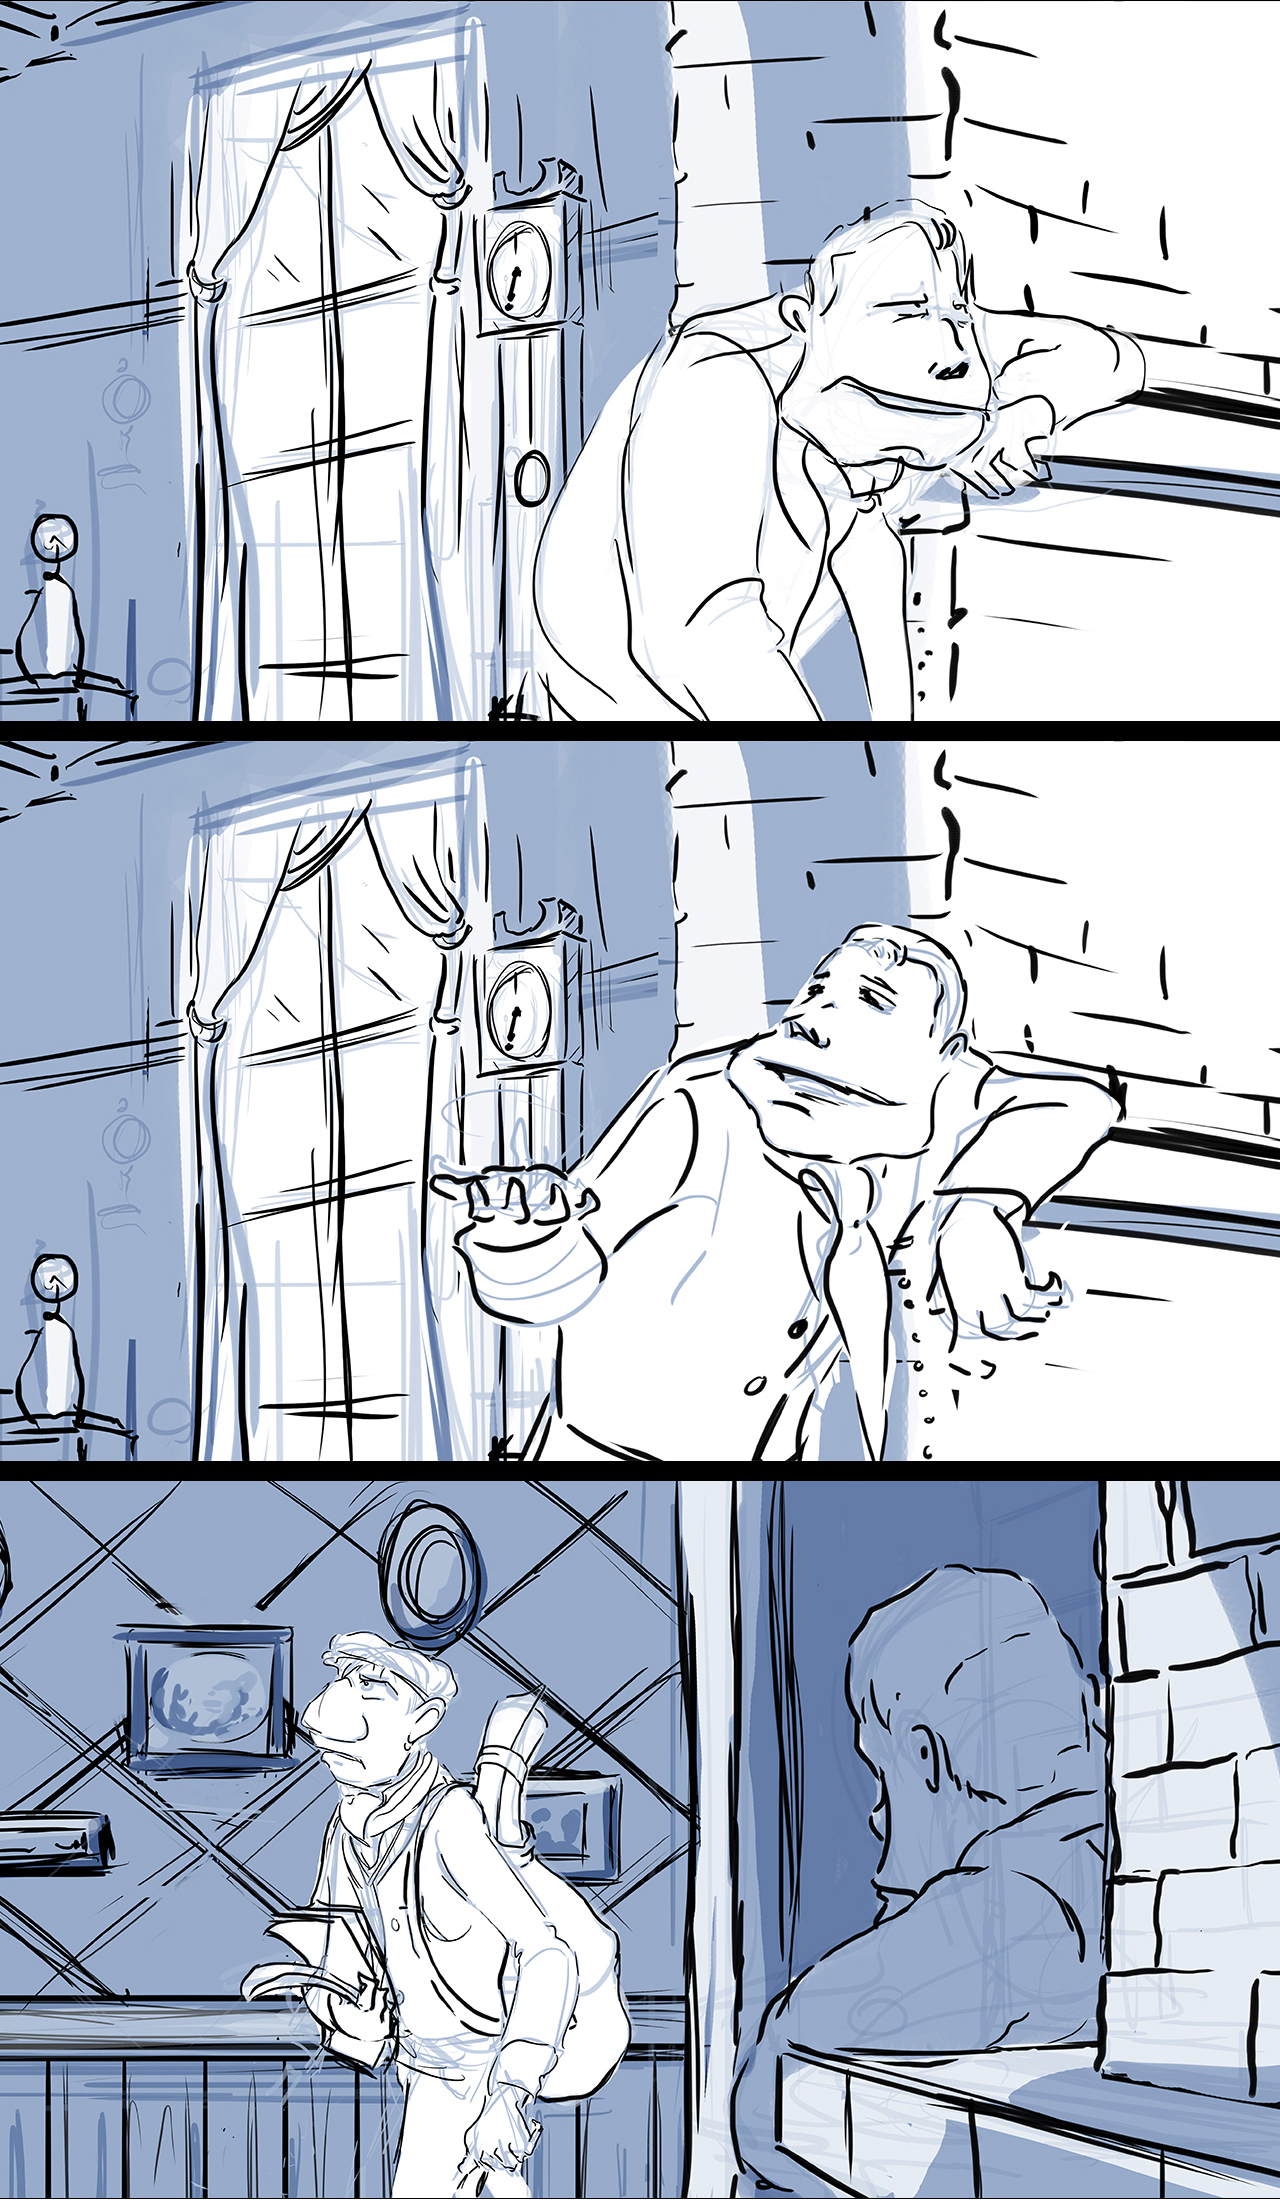 Storyboard sequence from an animated film. Sequence show the man reveal himself to be very drunk and he fall onto the mantle. He turns to the younger man, who's just entered, to ask a question.